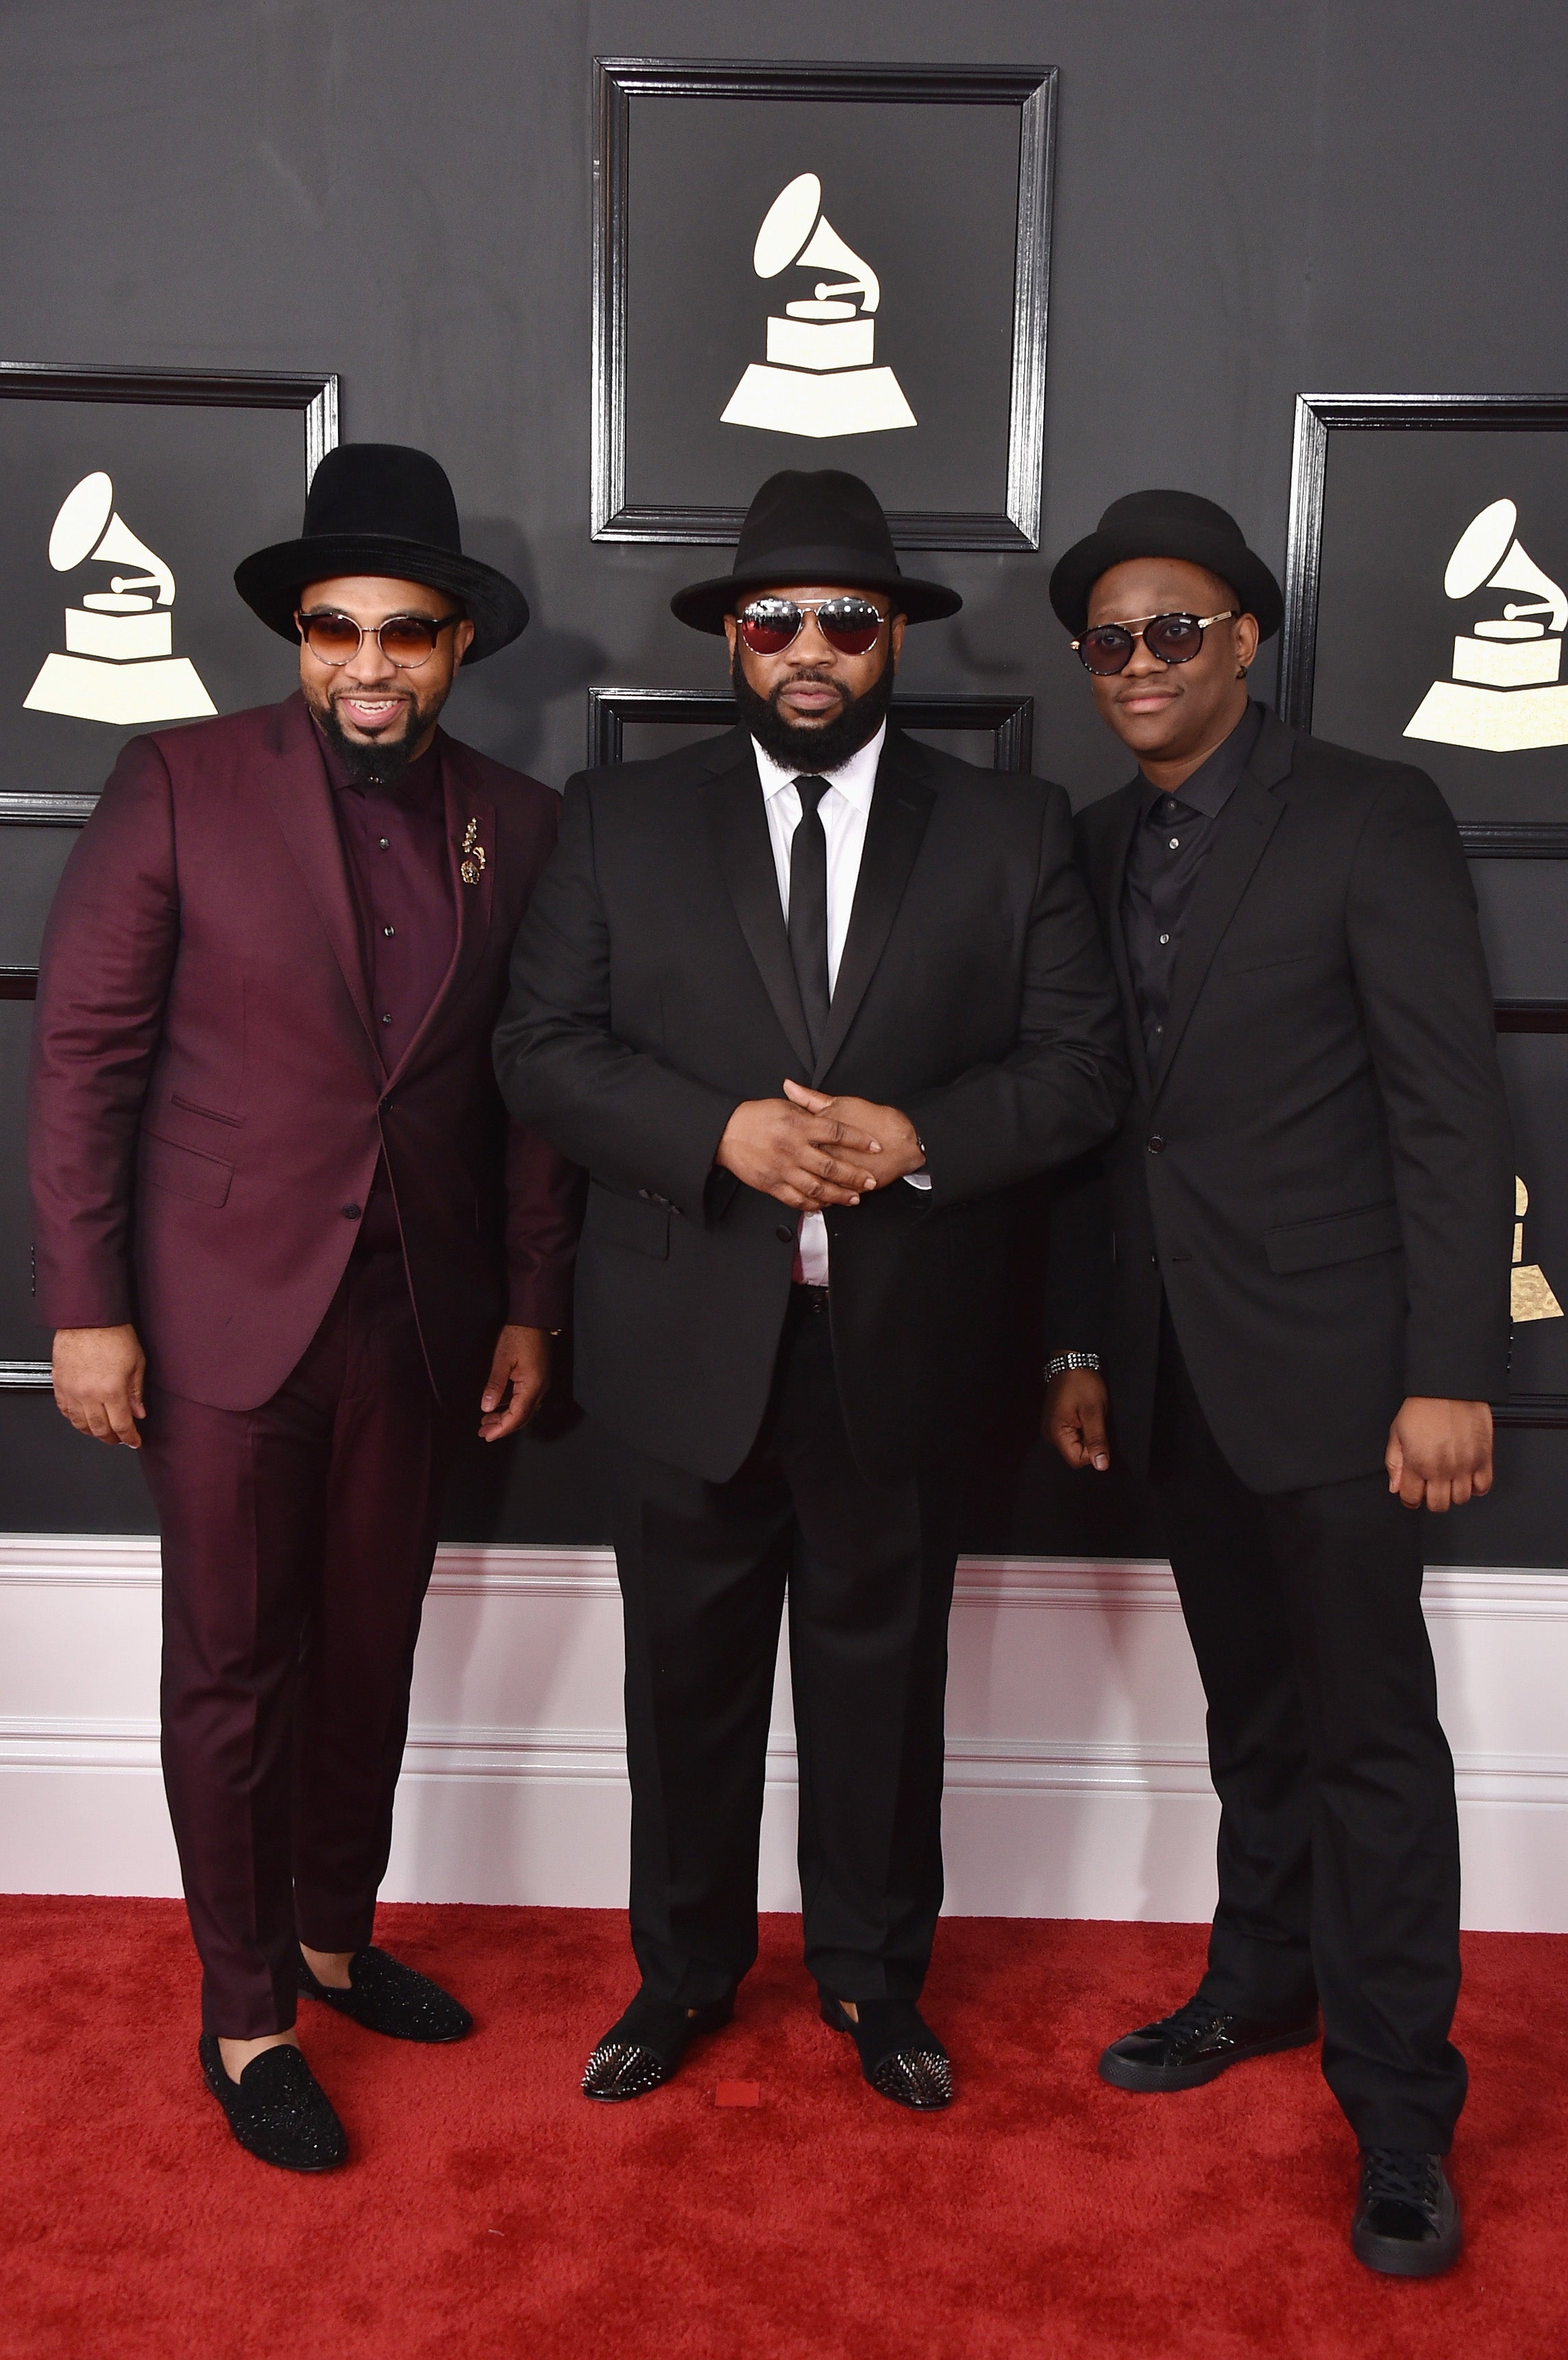 The 59th Annual Grammy Awards Red Carpet Was on Another Level of Fabulous